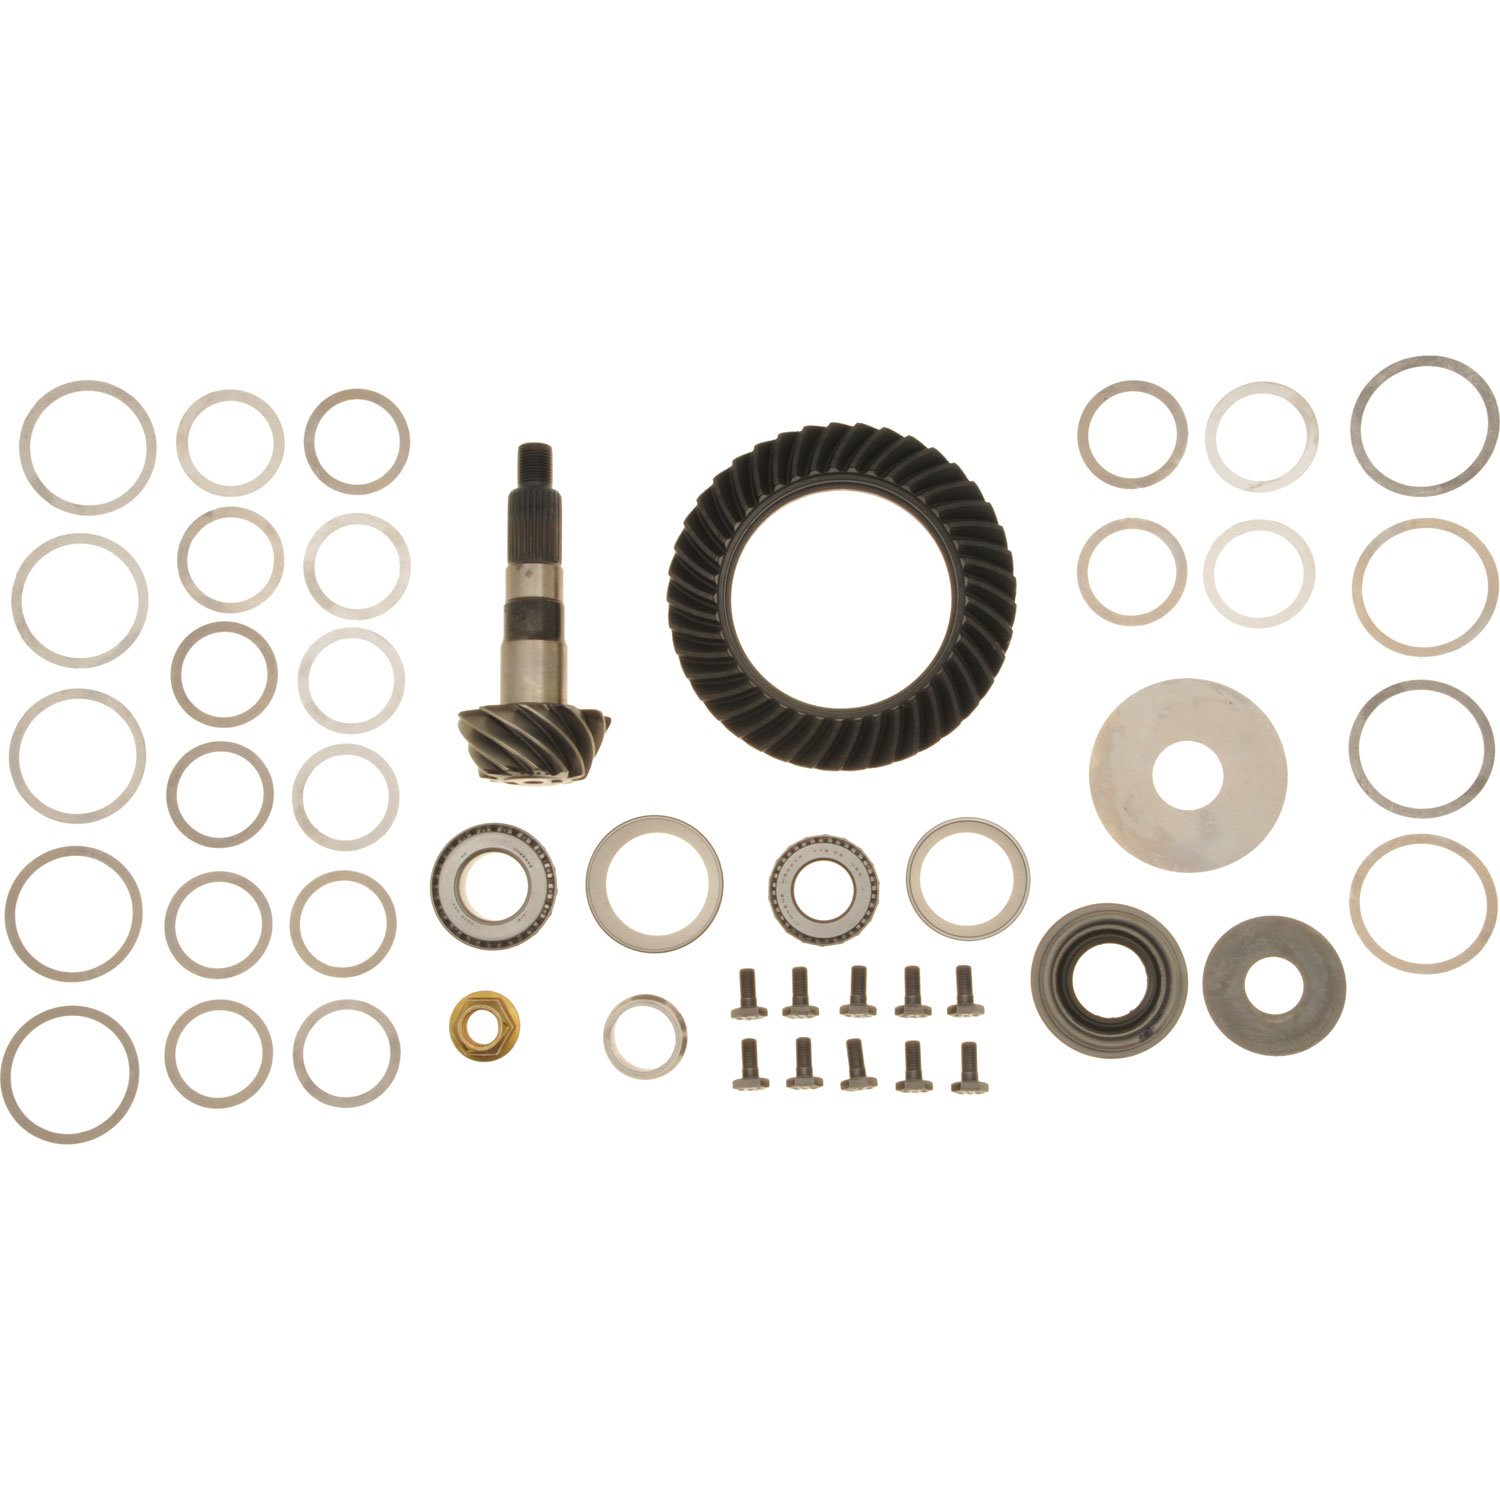 SPICER DIFFERENTIAL RING & PINION KIT DANA 30